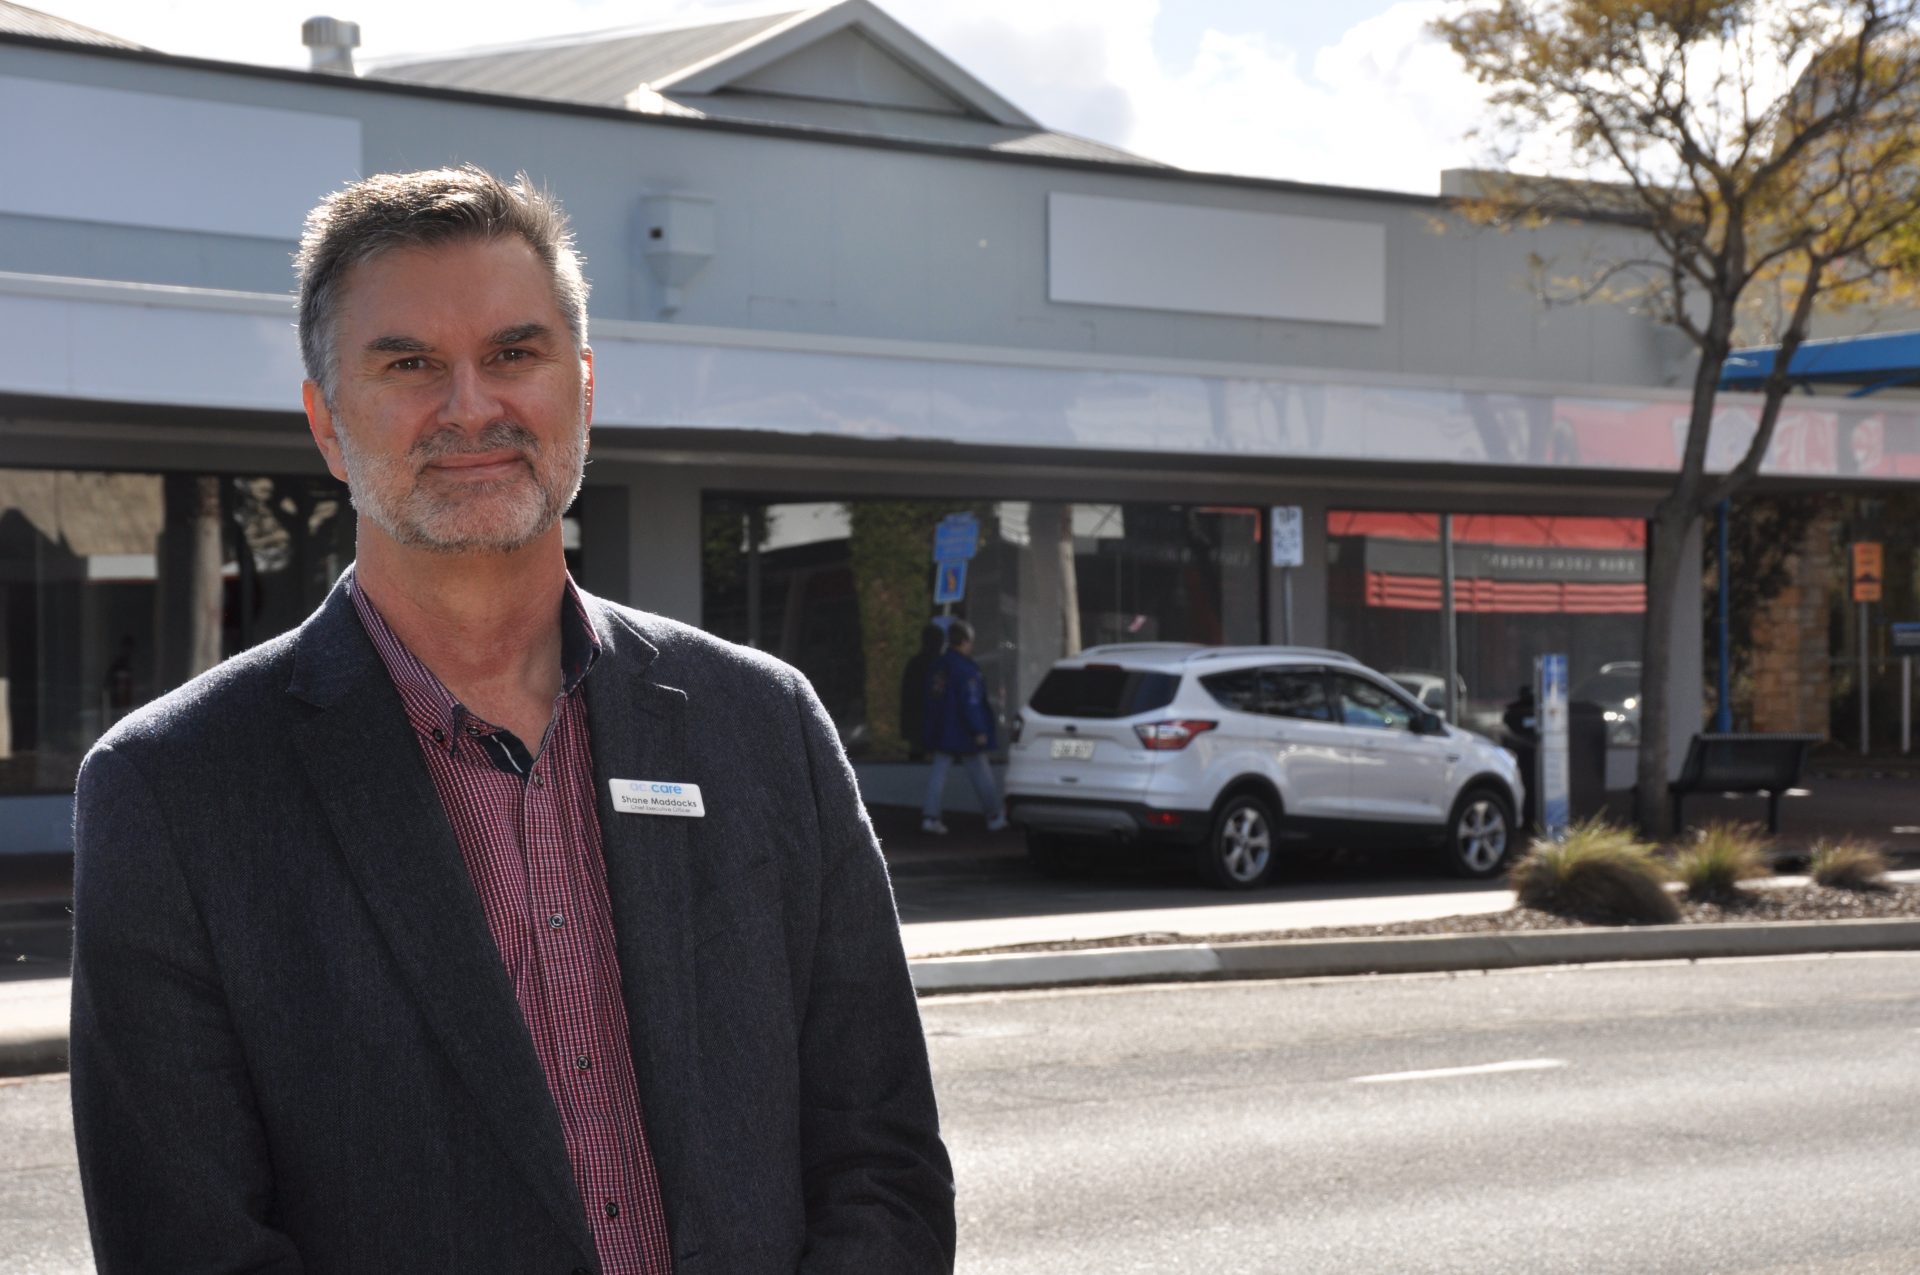 NEW LOCATION: ac.care chief executive officer Shane Maddocks outside the Bridge Street office building, where the regional social welfare agency’s services will be consolidated at one site.